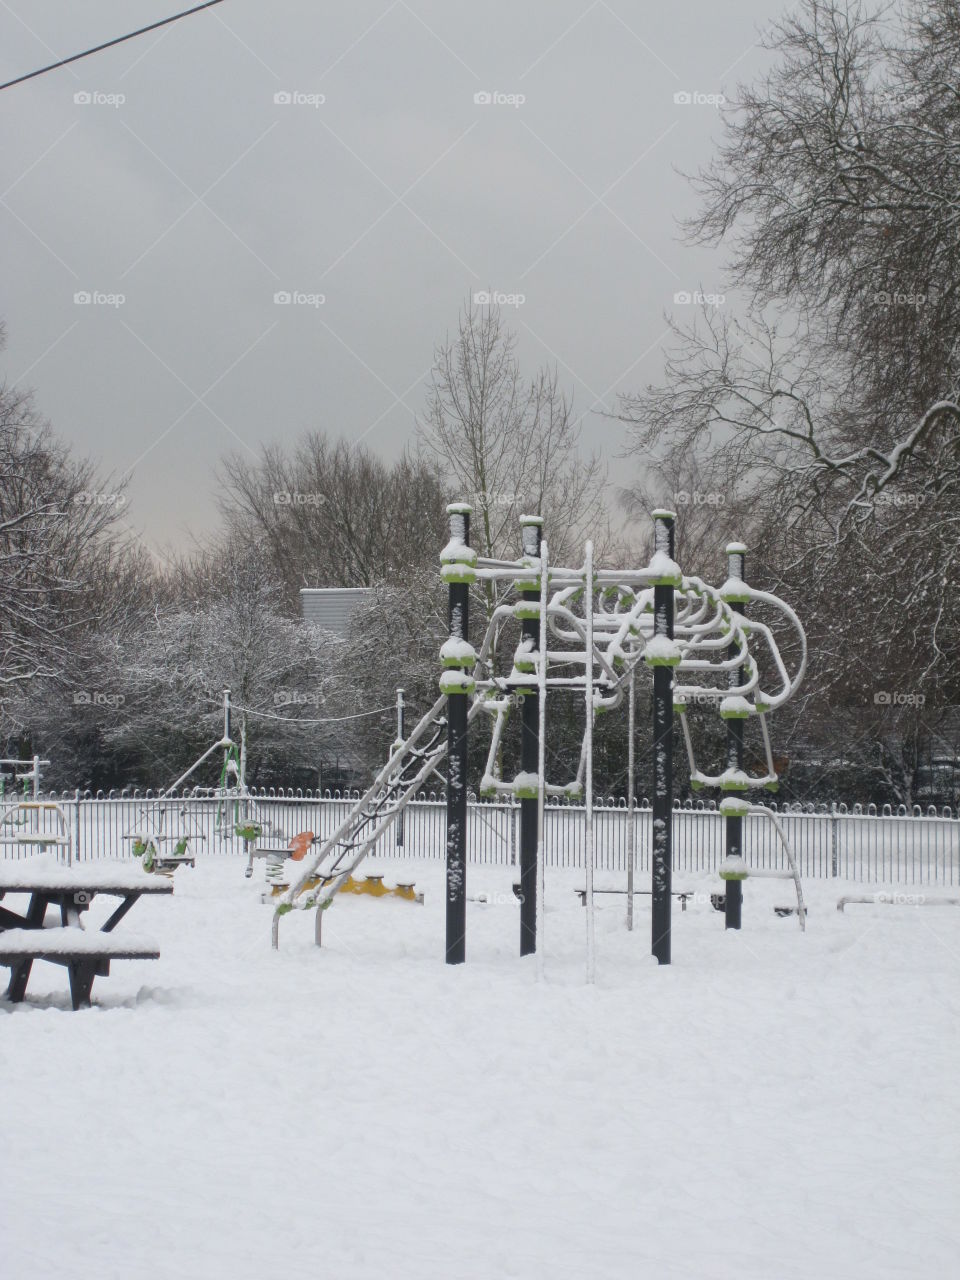 playground in the snow